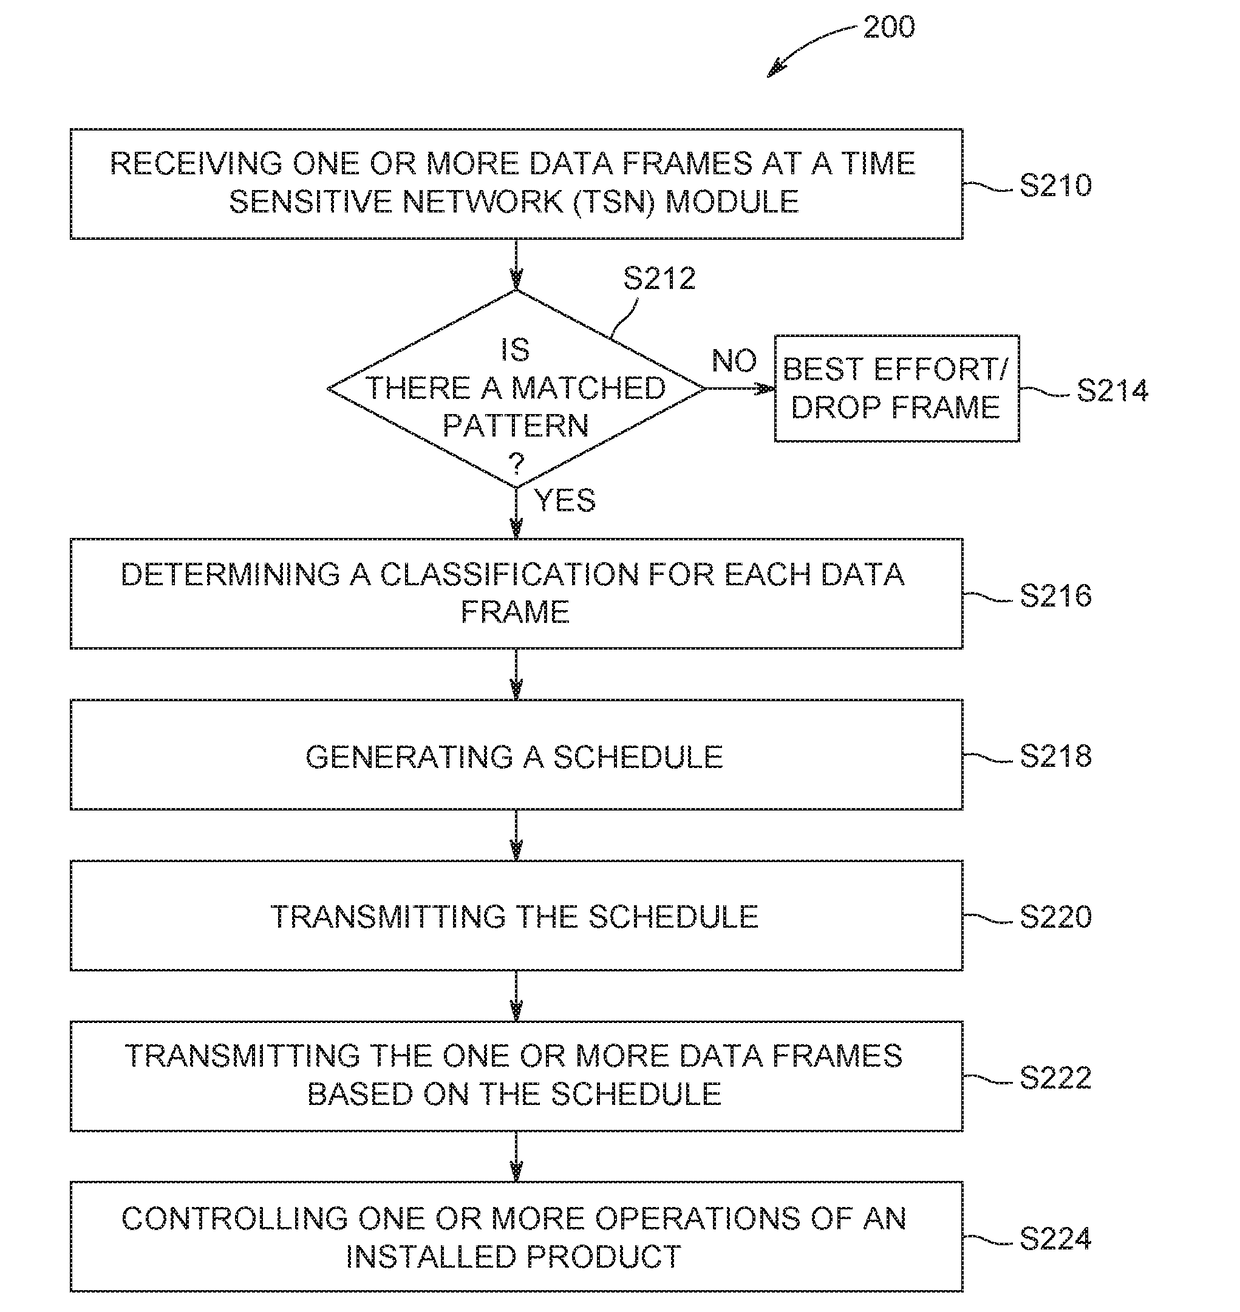 Time-sensitive networking differentiation of traffic based upon content